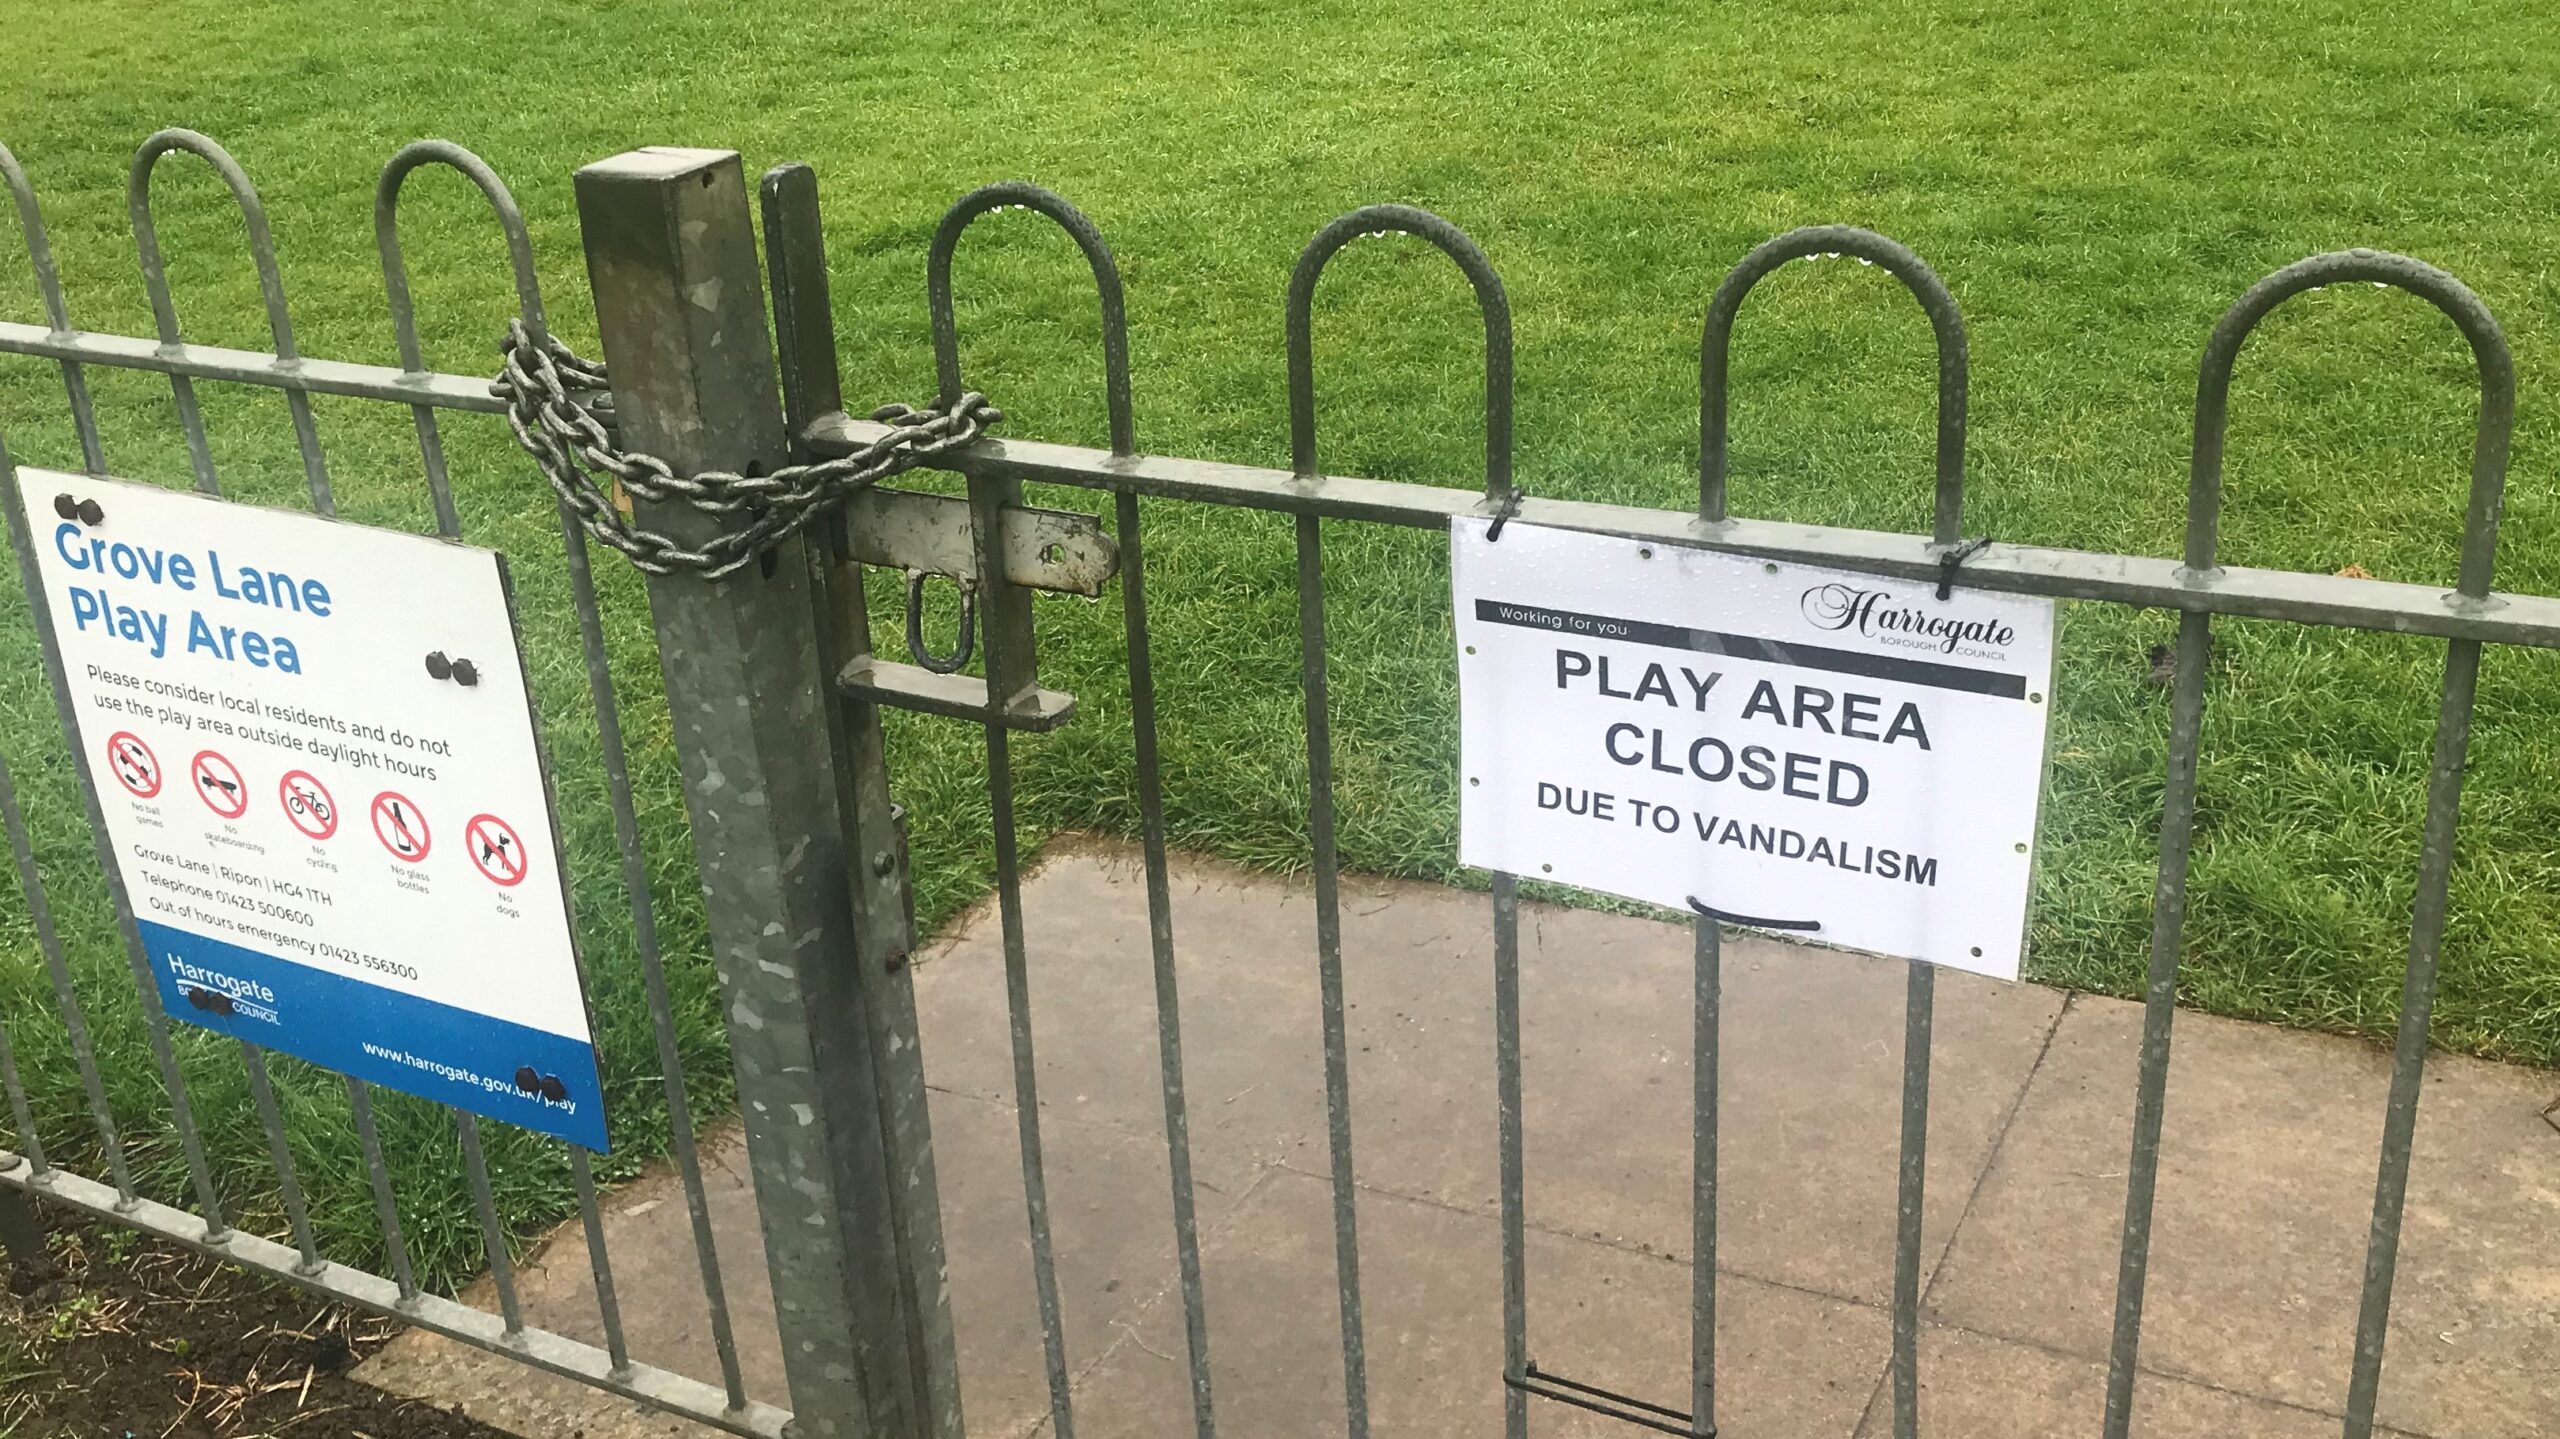 Photograph of the locked-up gate at the vandalised play area